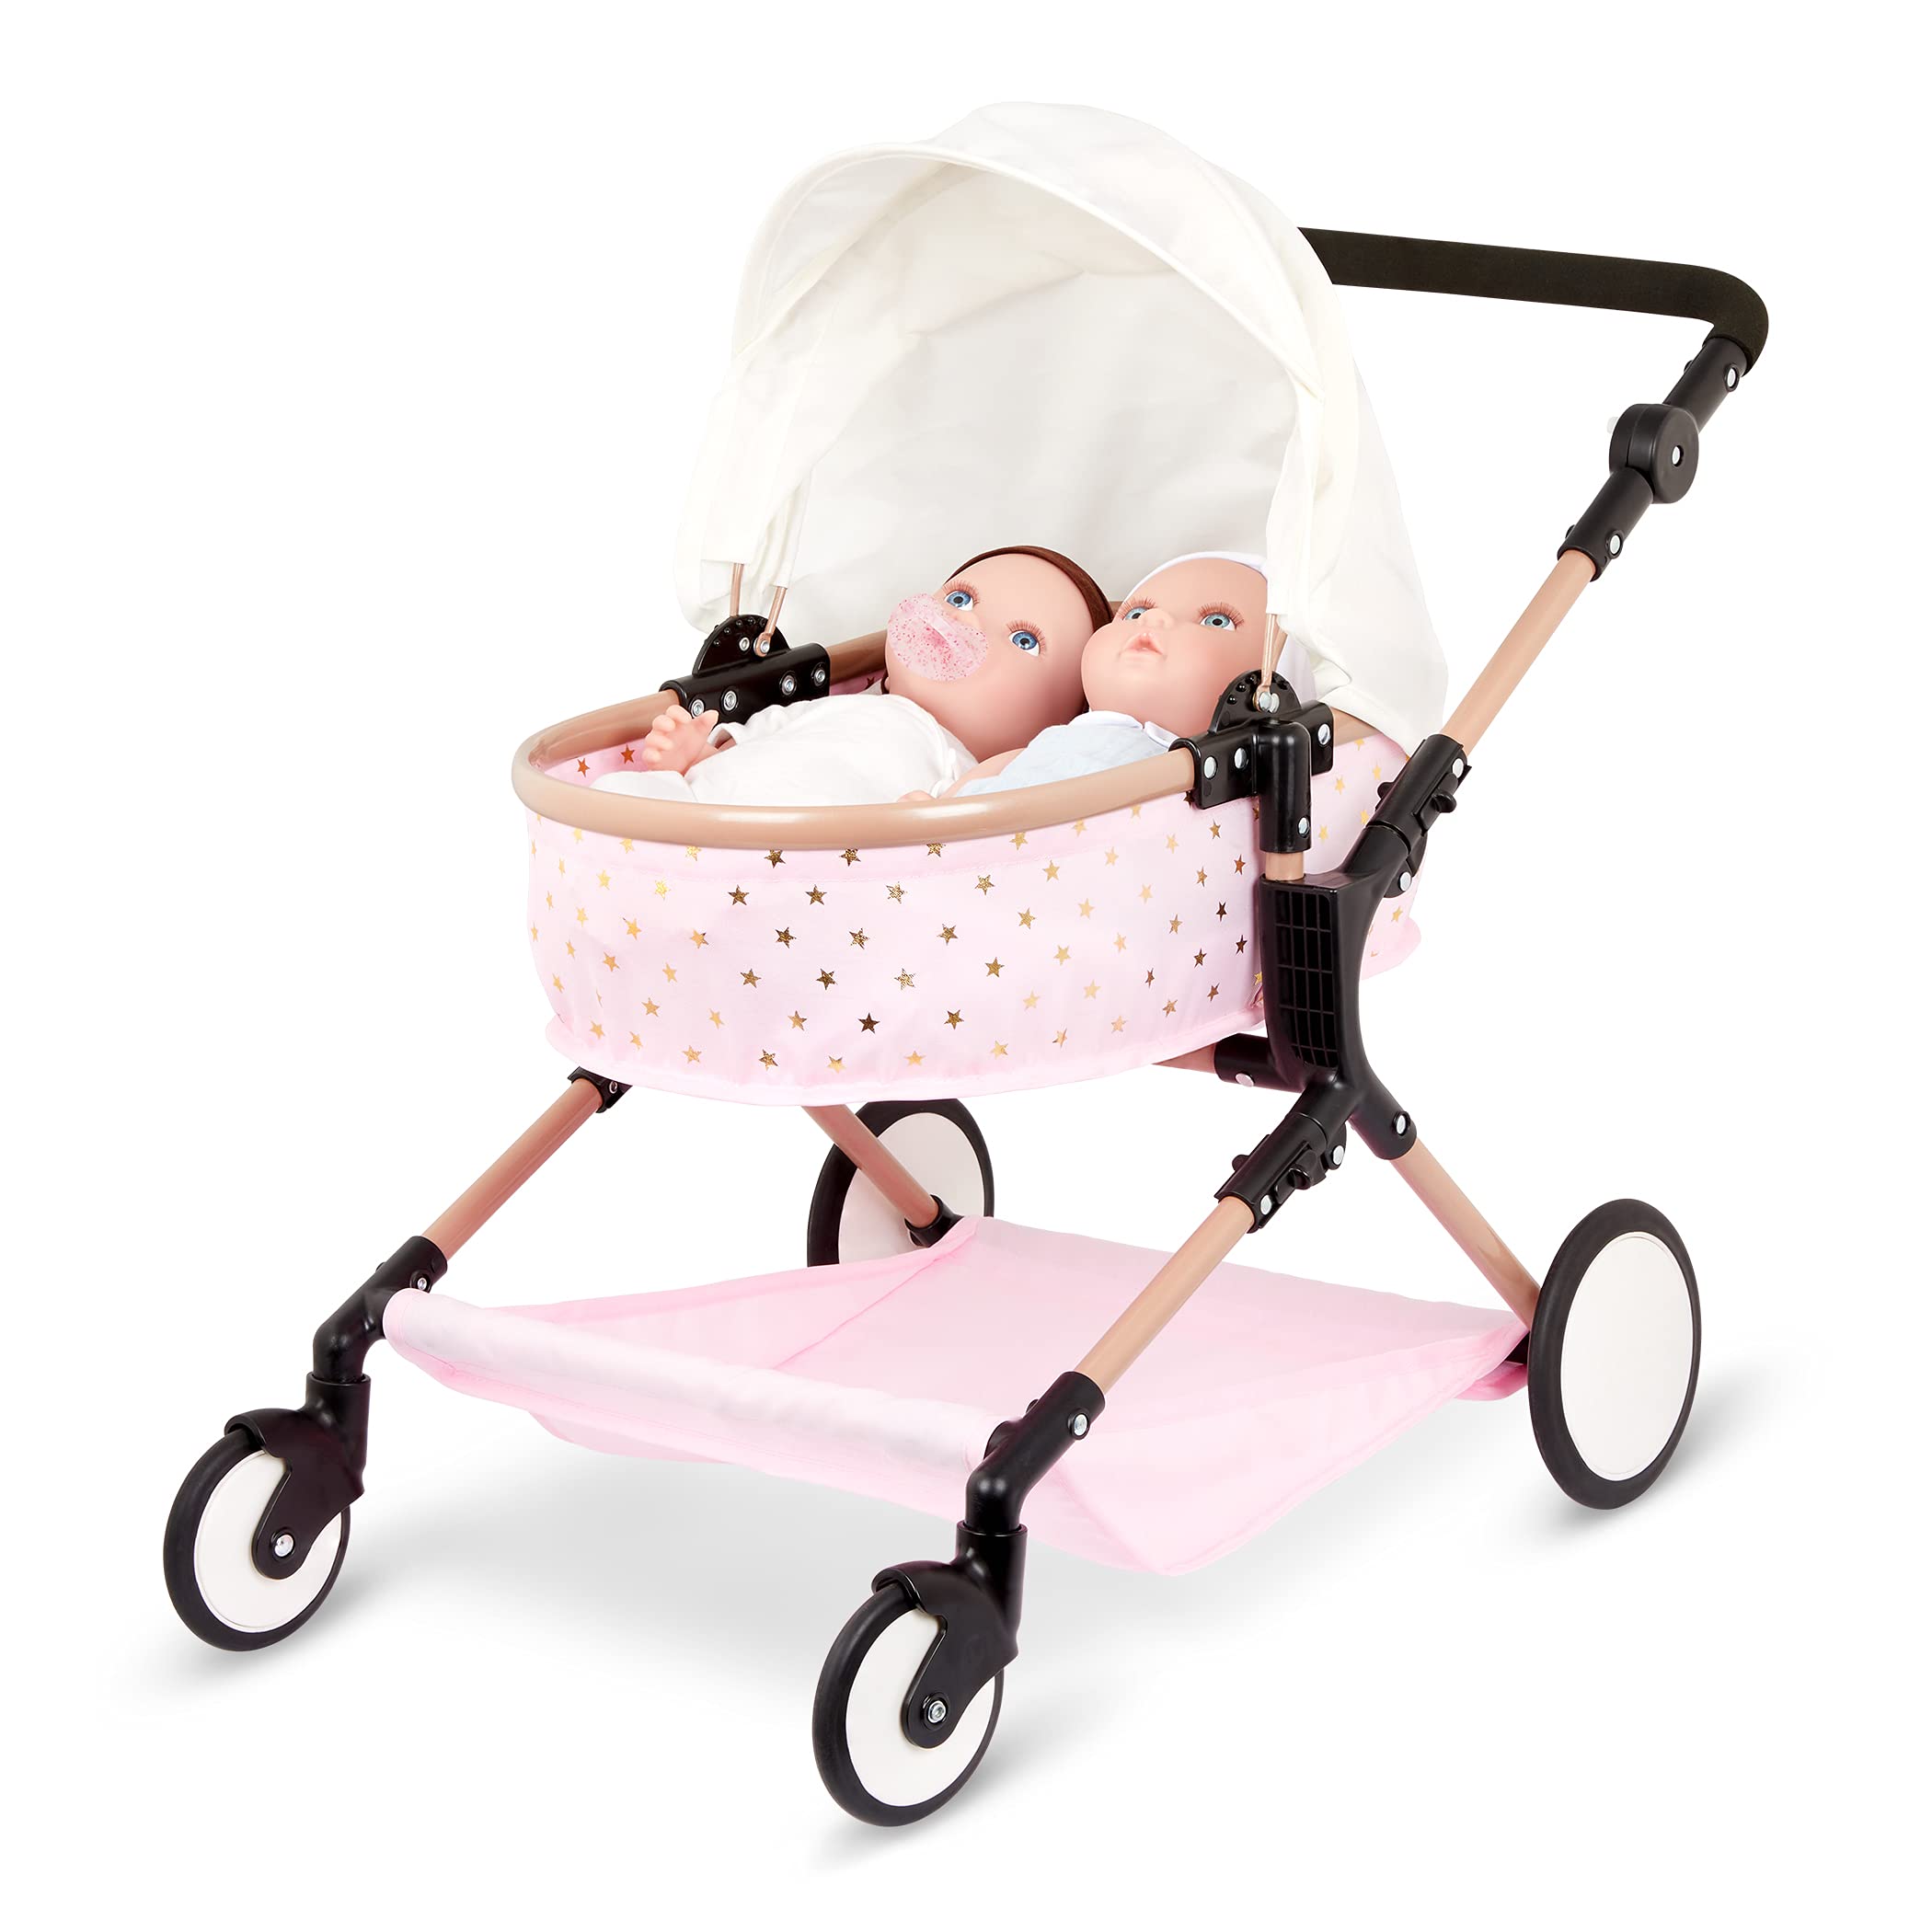 babi by Battat - Baby Doll Double Stroller Mini Gold Stars Foldable Canopy, Swivel Wheels, Basket Pink Carriage Fits Twin 14-inch Dolls Children’s Toys Kids Ages 2+ (BAB7630C1Z)